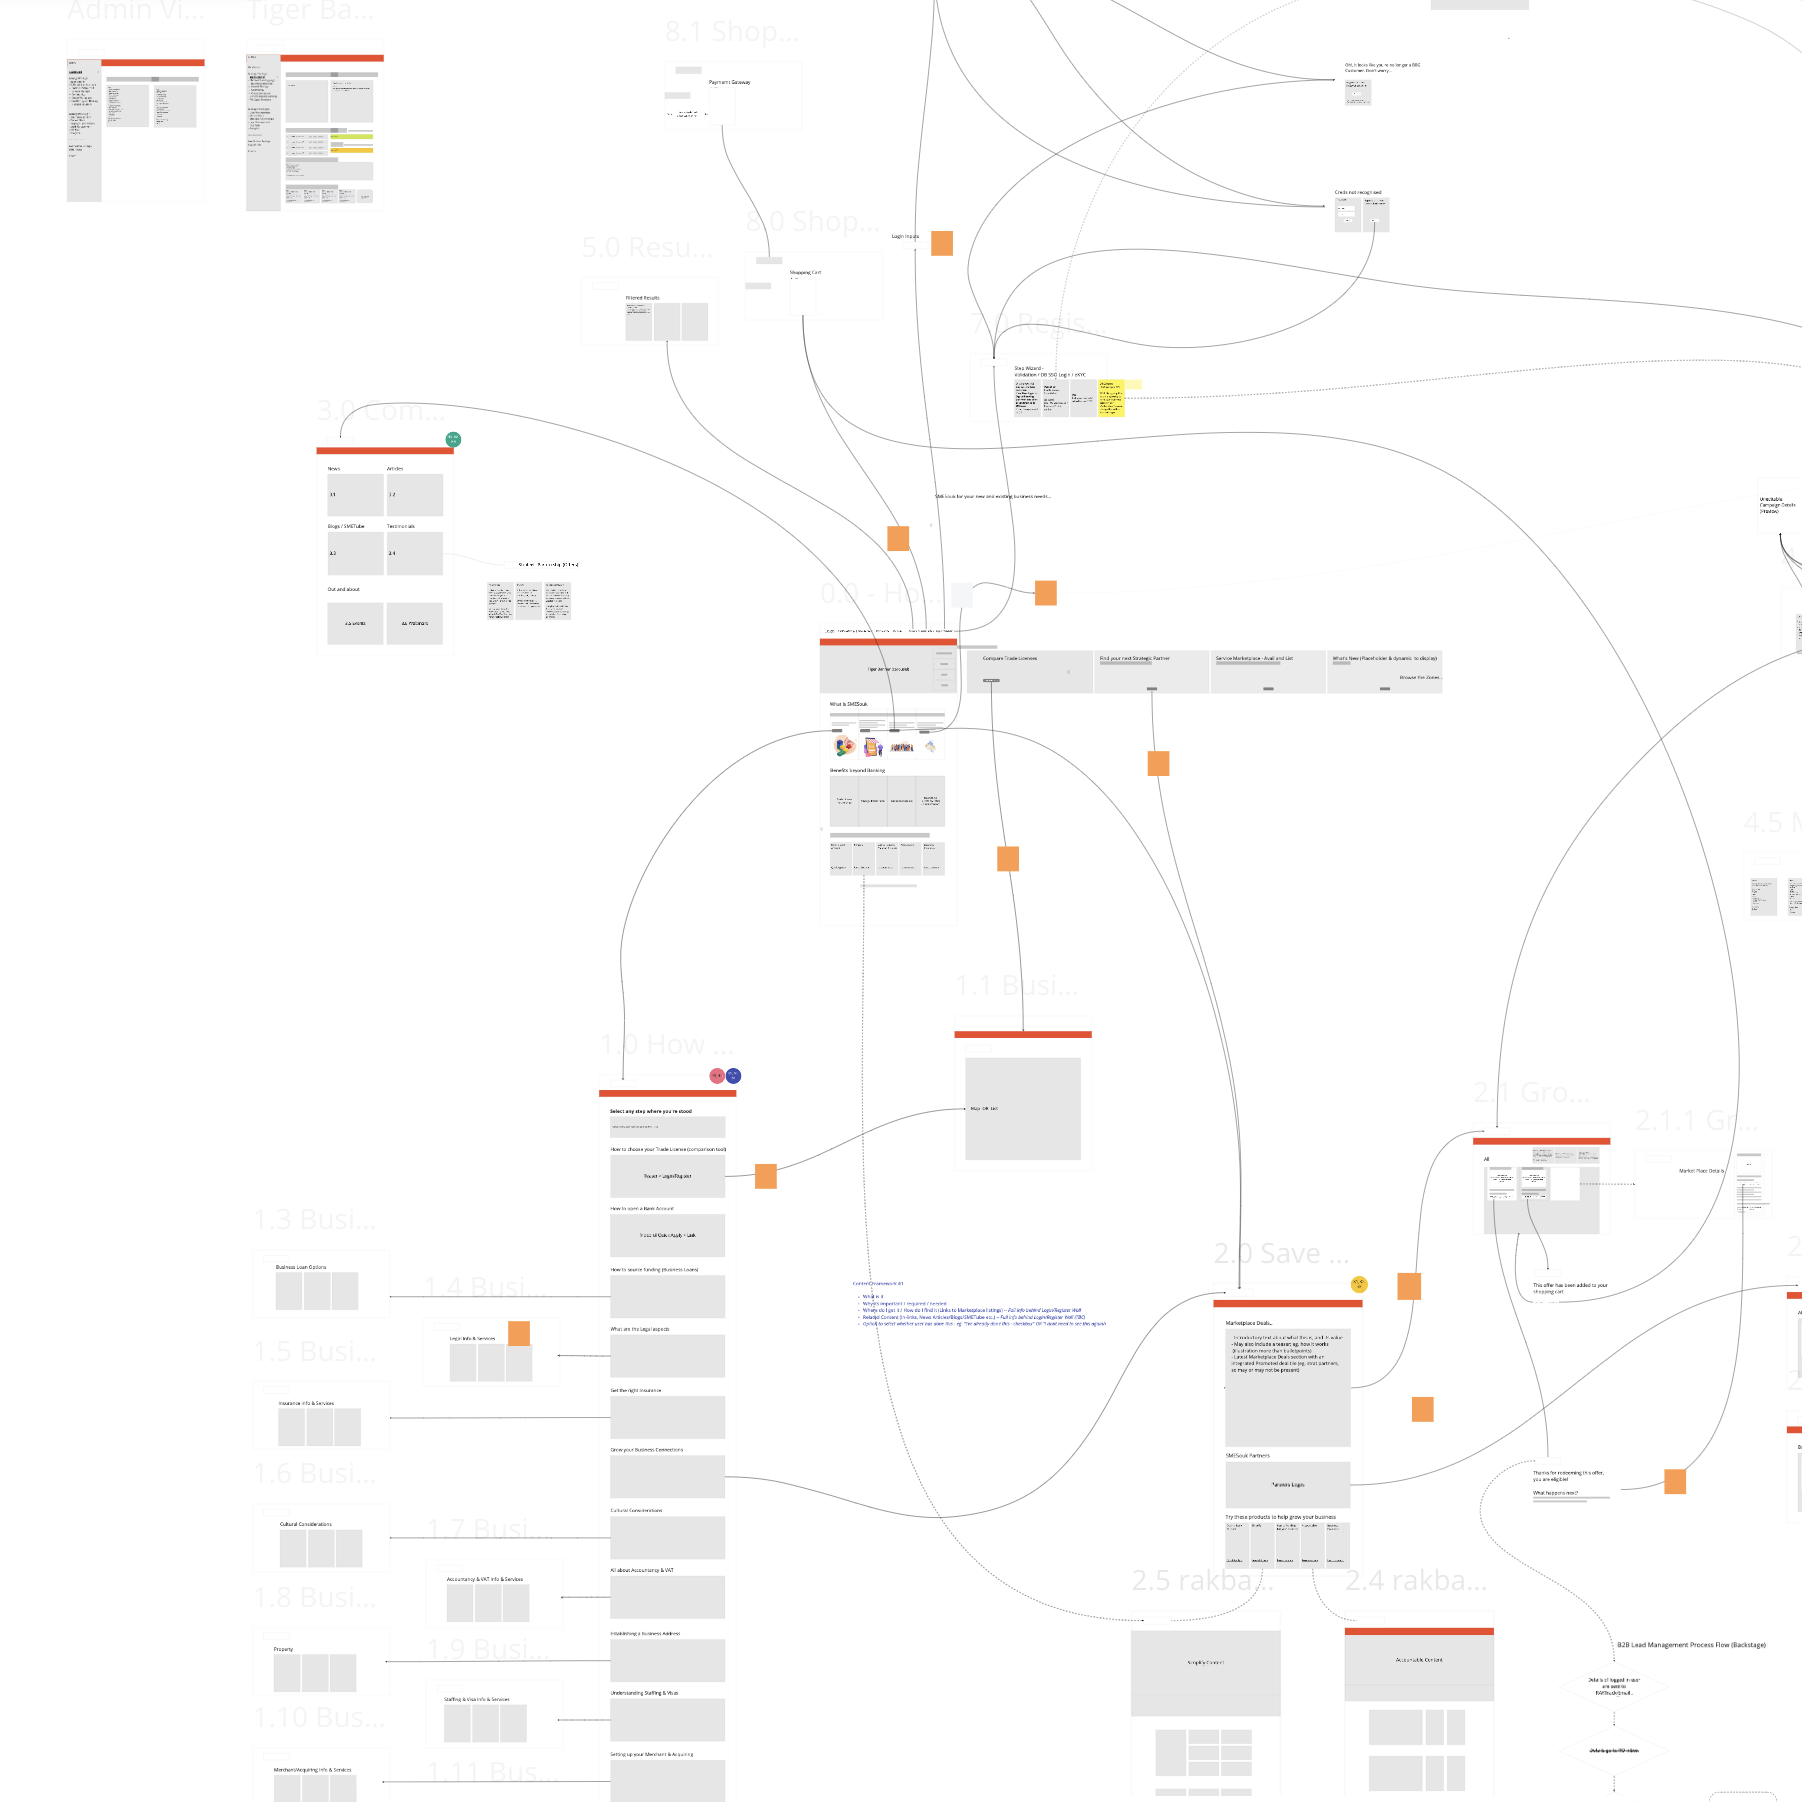 Articulation and mapping of website pages - fundamental information architecture artefact